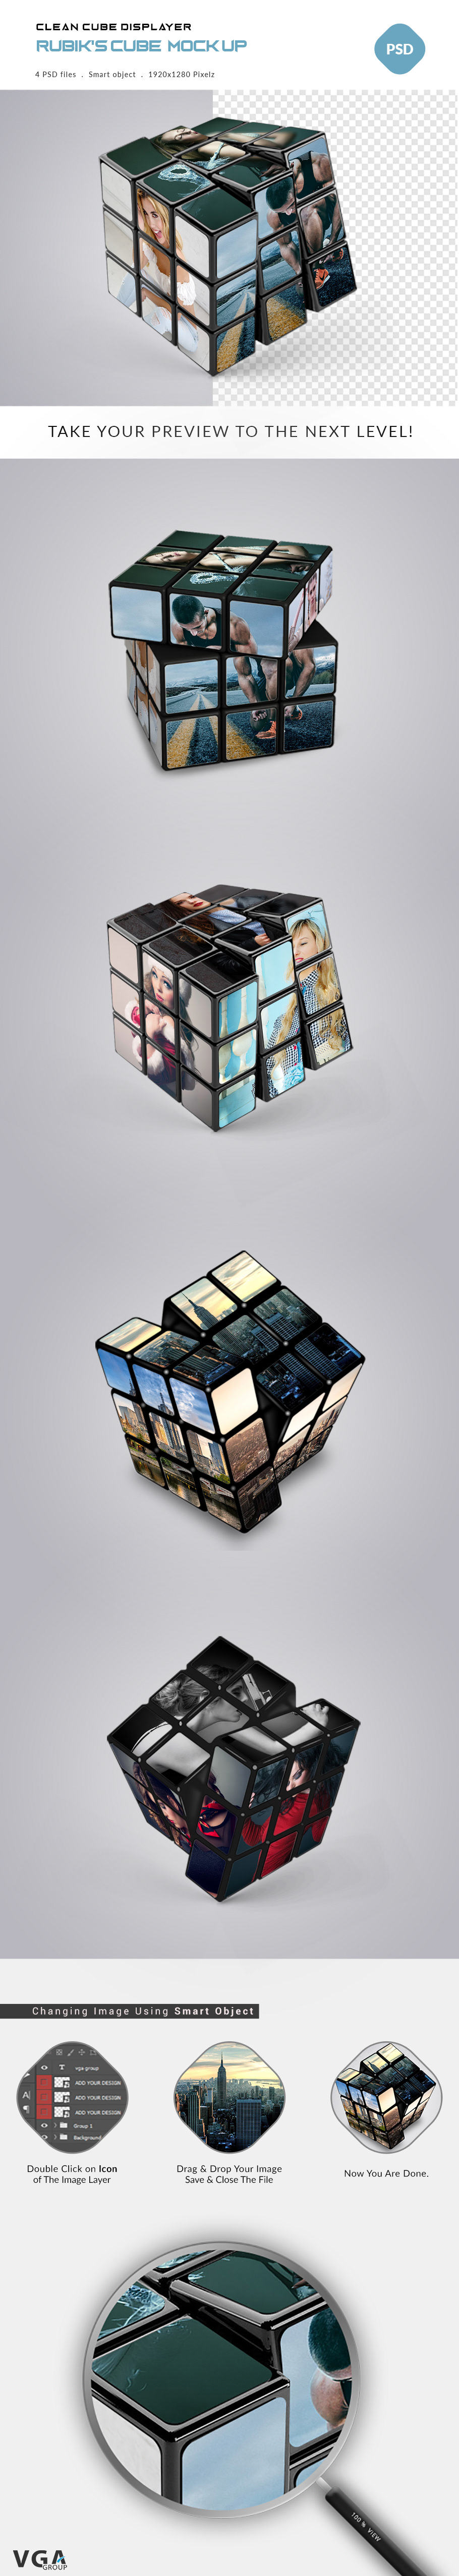 rubik cube box mockup mock-ups preview package Package box packaging design product mockup Vintage Packaging Technology toys